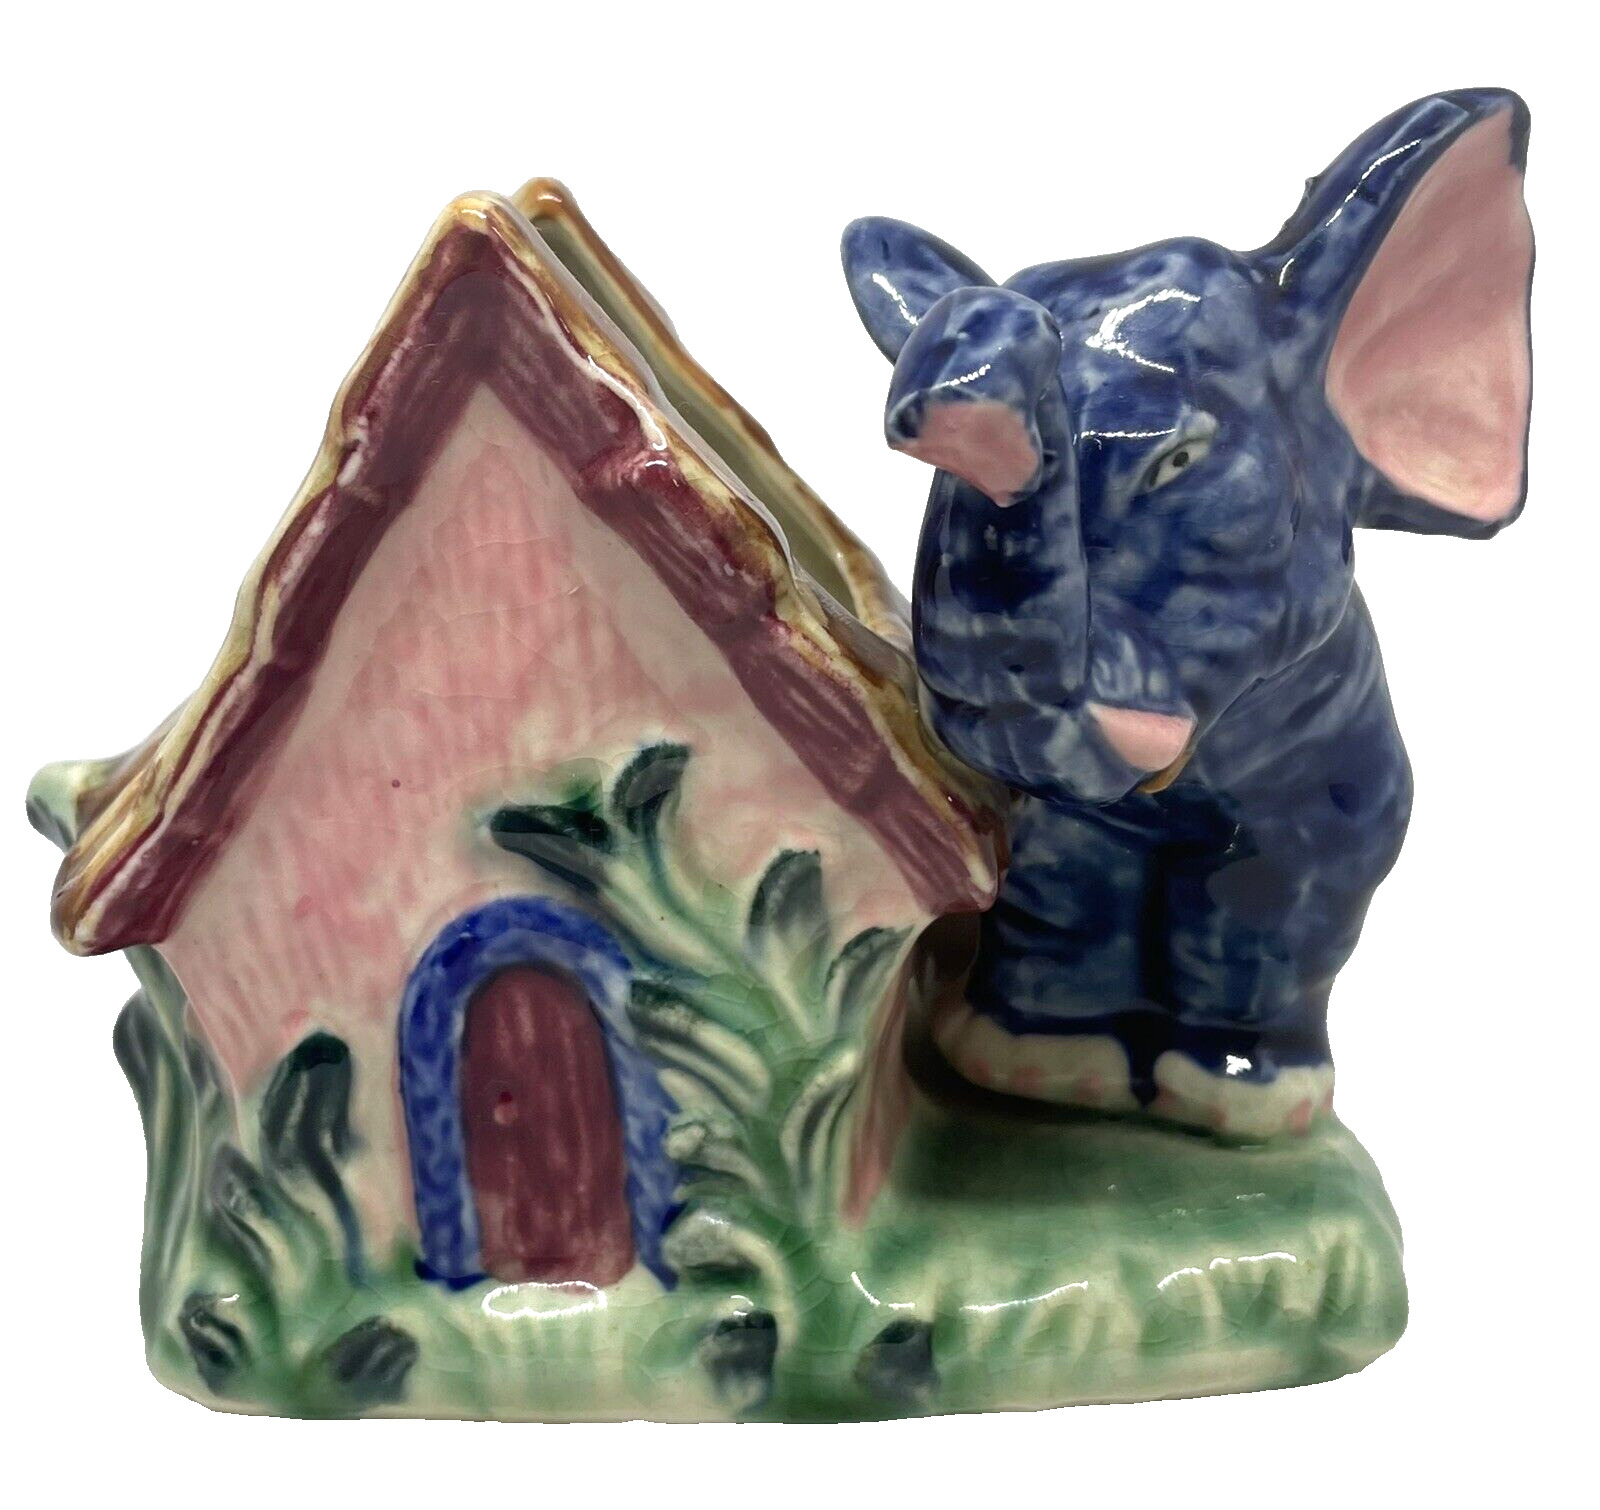 VINTAGE ENESCO SMALL BLUE ELEPHANT BY PINK COTTAGE CERAMIC PLANTER